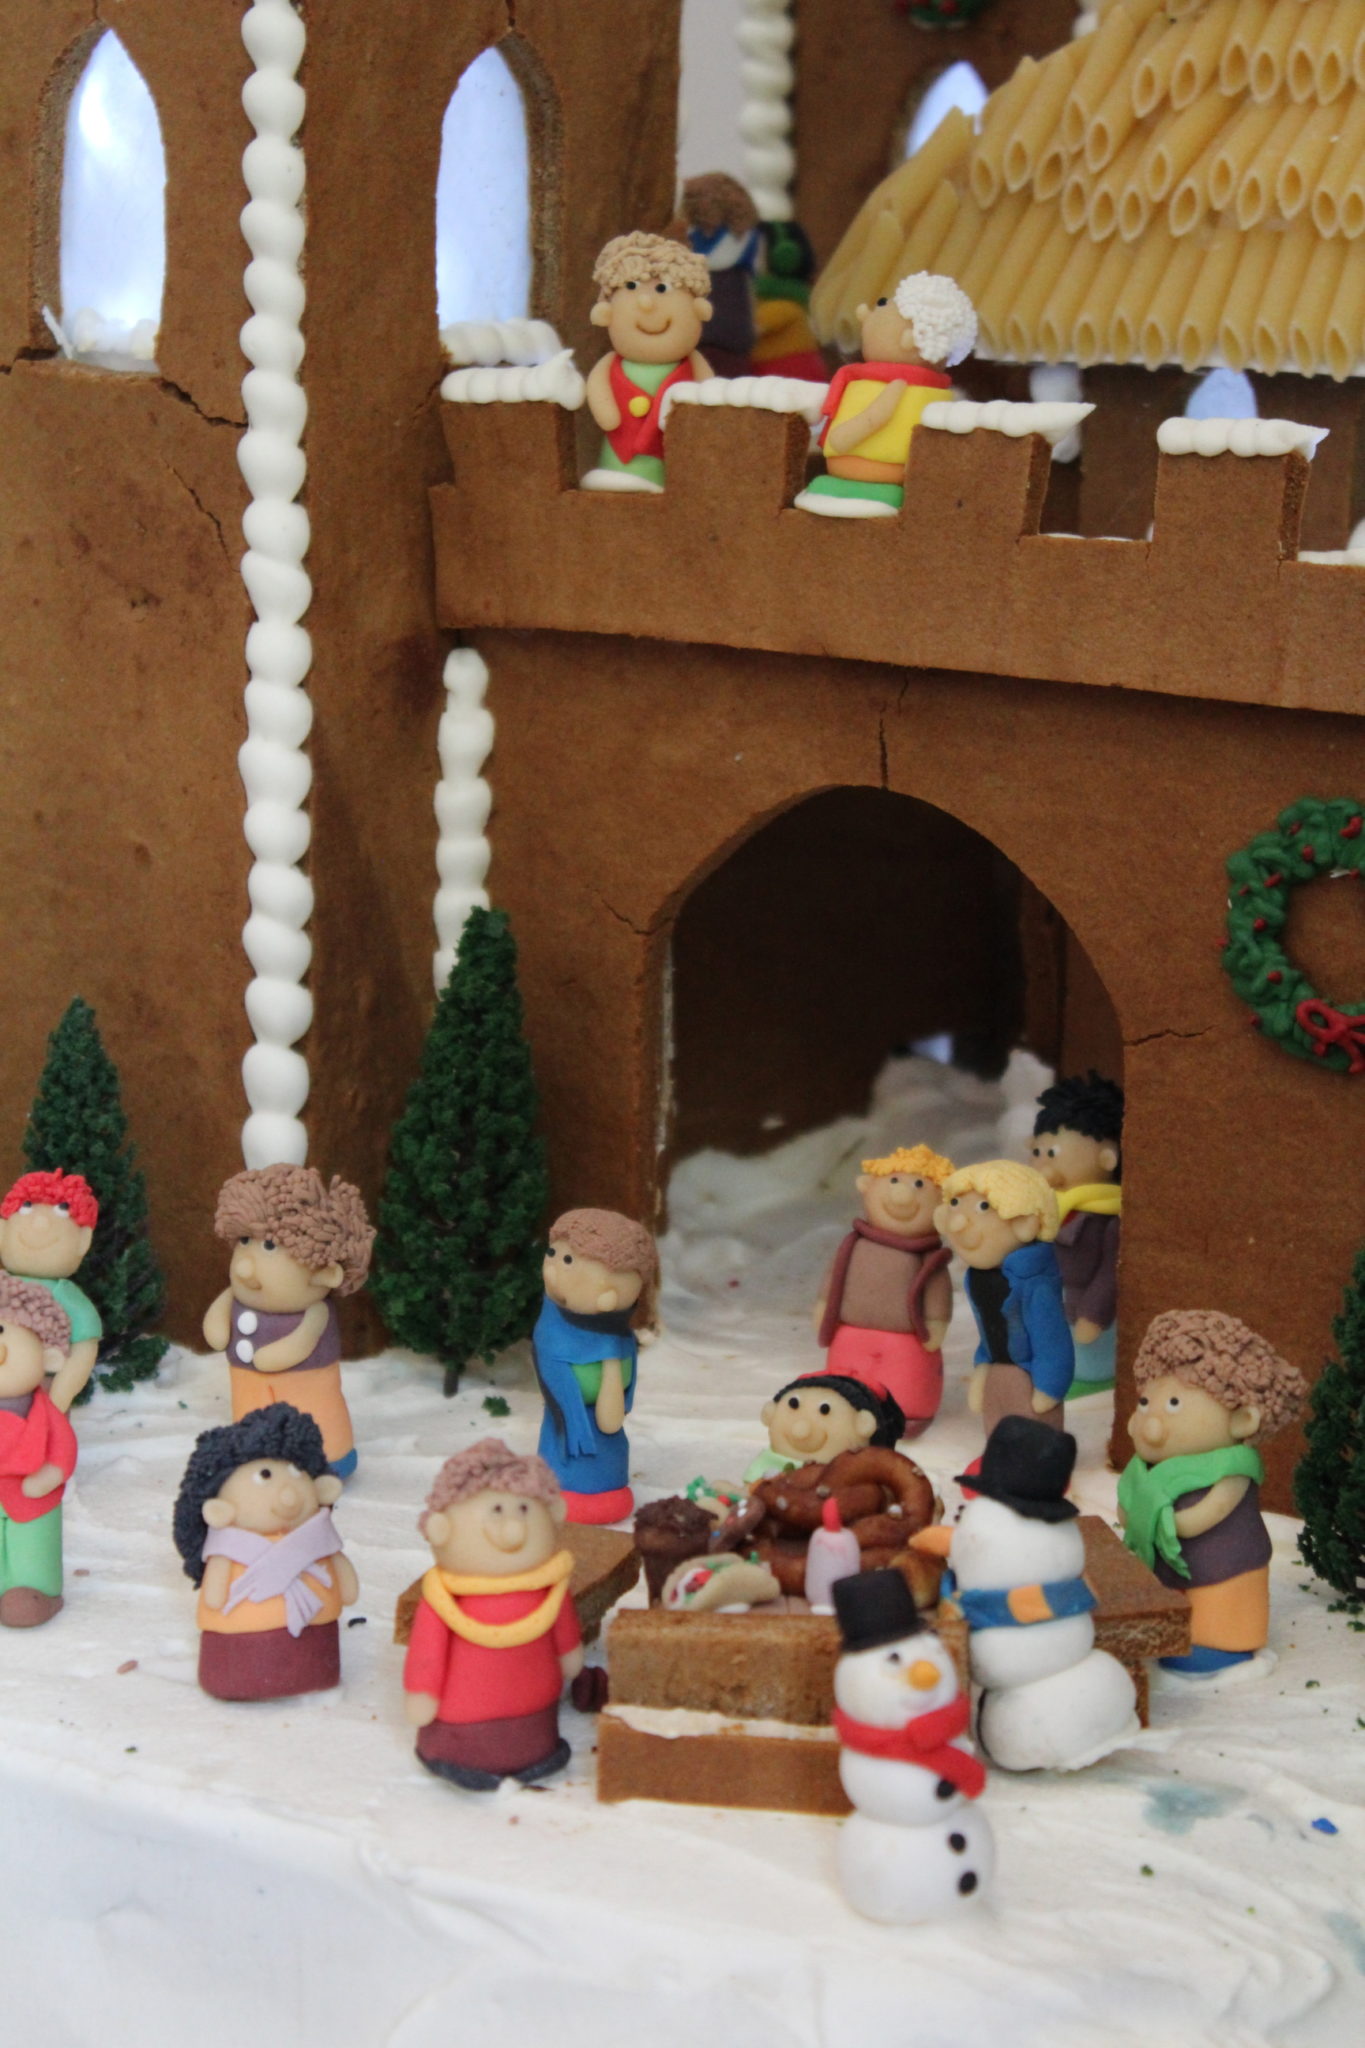 Cute and crumbly: Melbourne Gingerbread Village